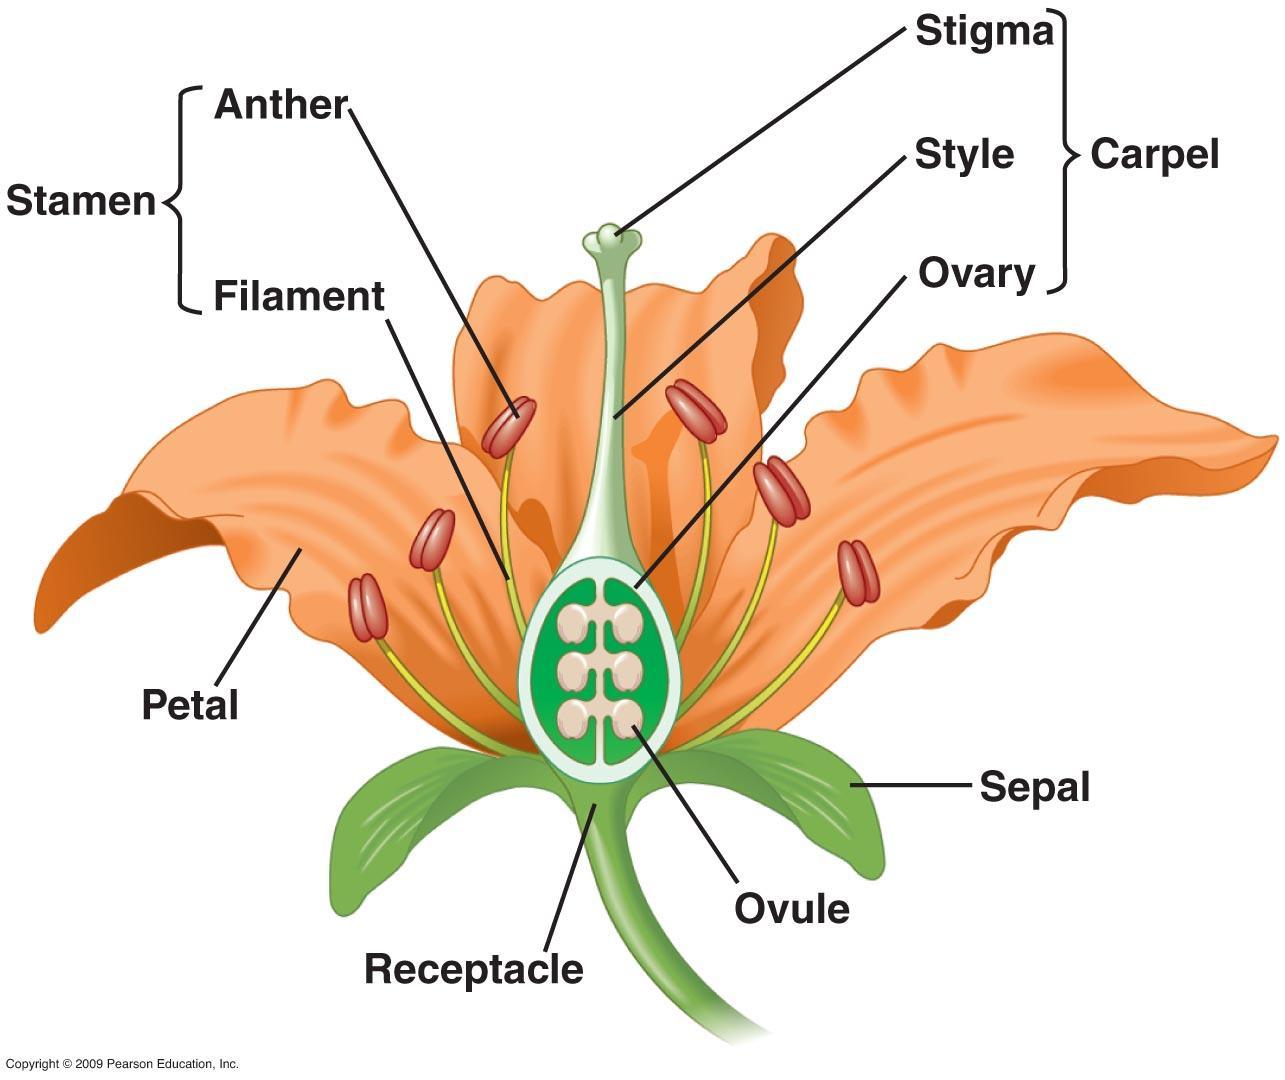 What Is The Reproduction Structure On The Flower That Is The Male Part?A) SepalsB) PetalsC) StamensD)